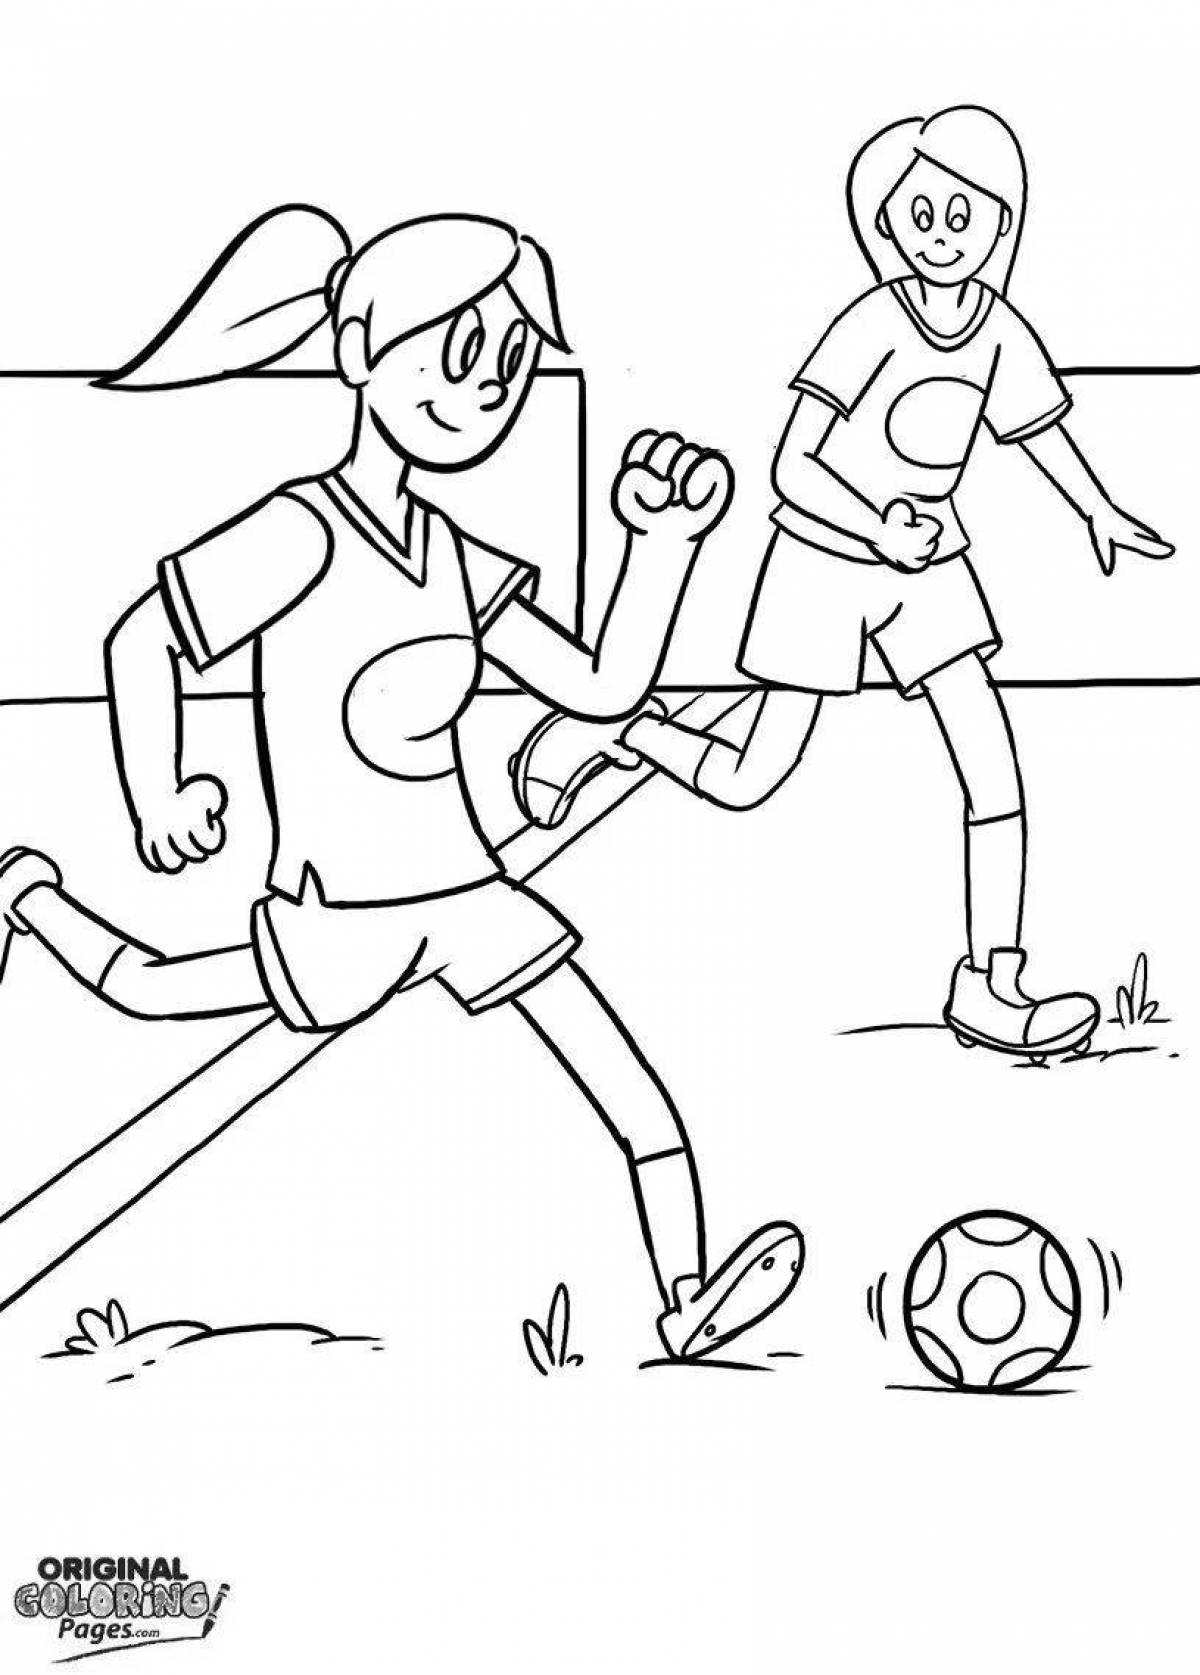 Exciting sports games coloring book